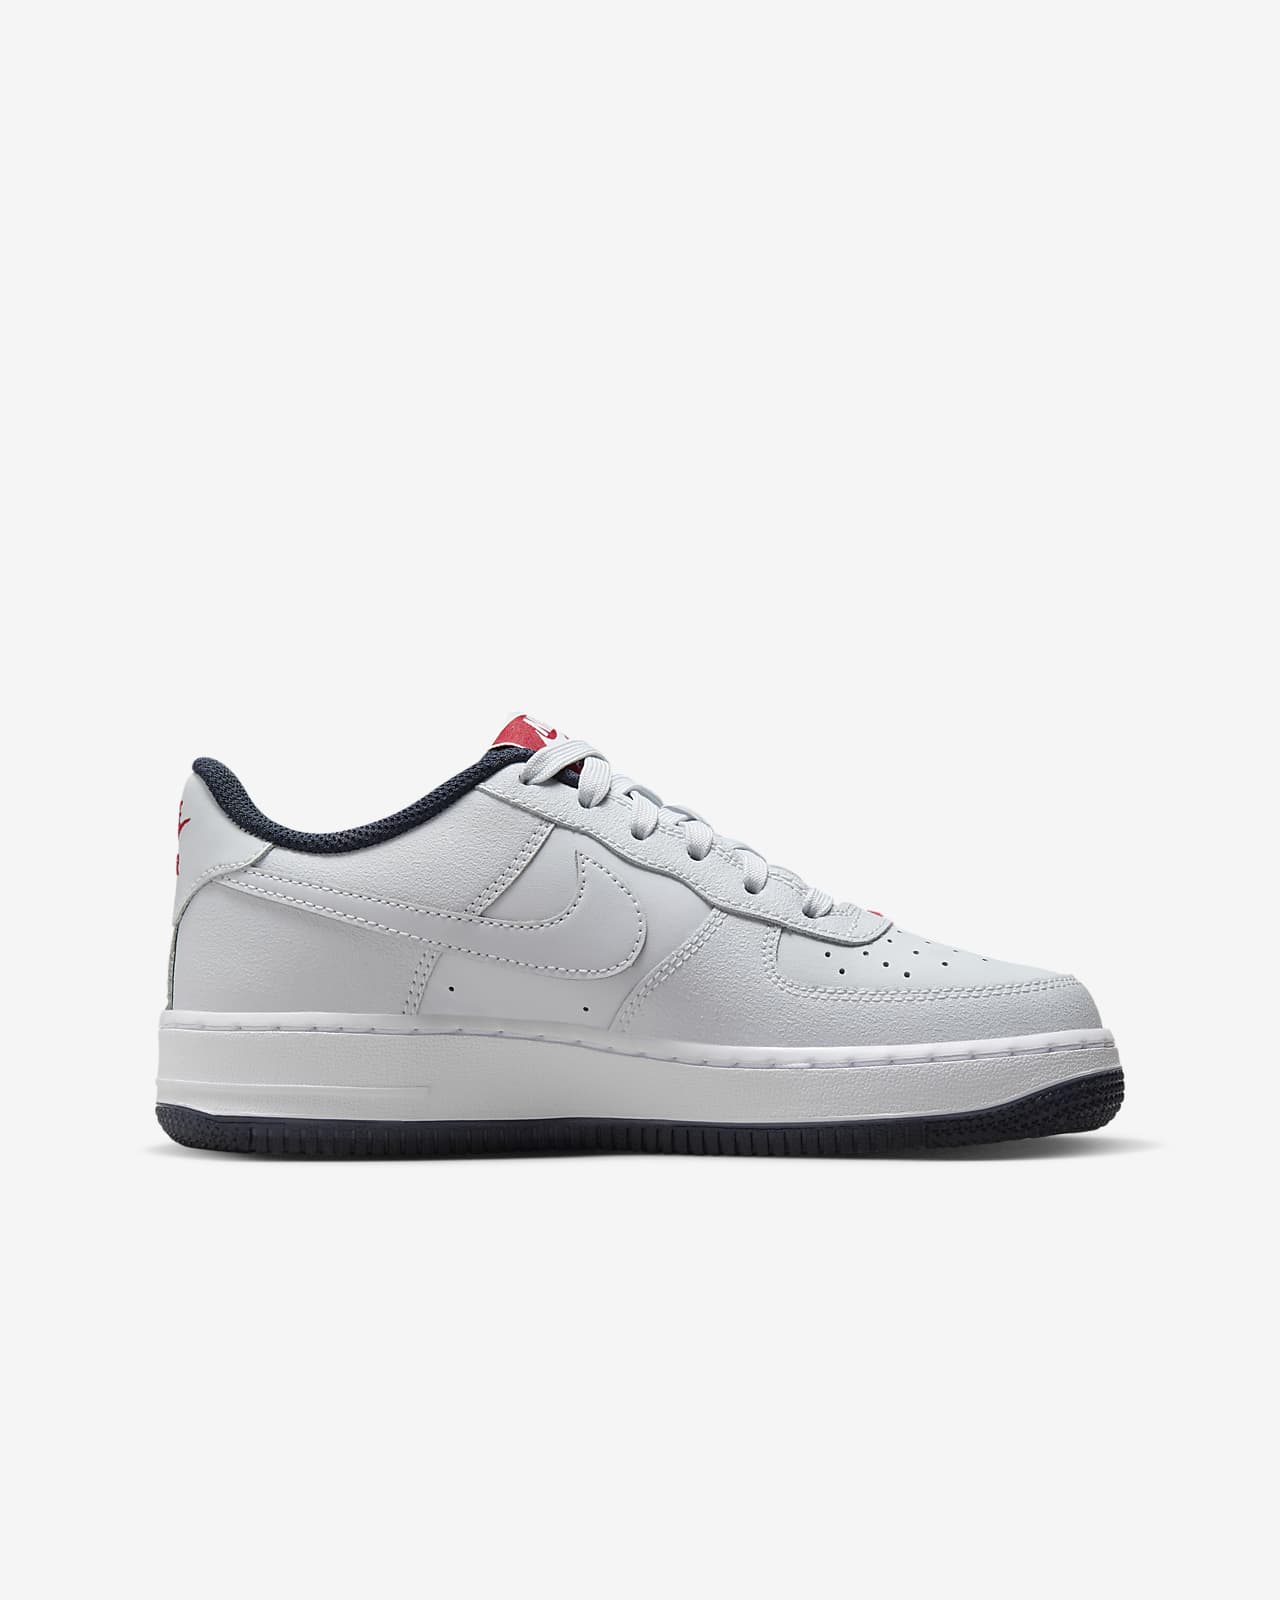 Nike Air Force 1 LV8 4 Older Kids' Shoes. Nike IL